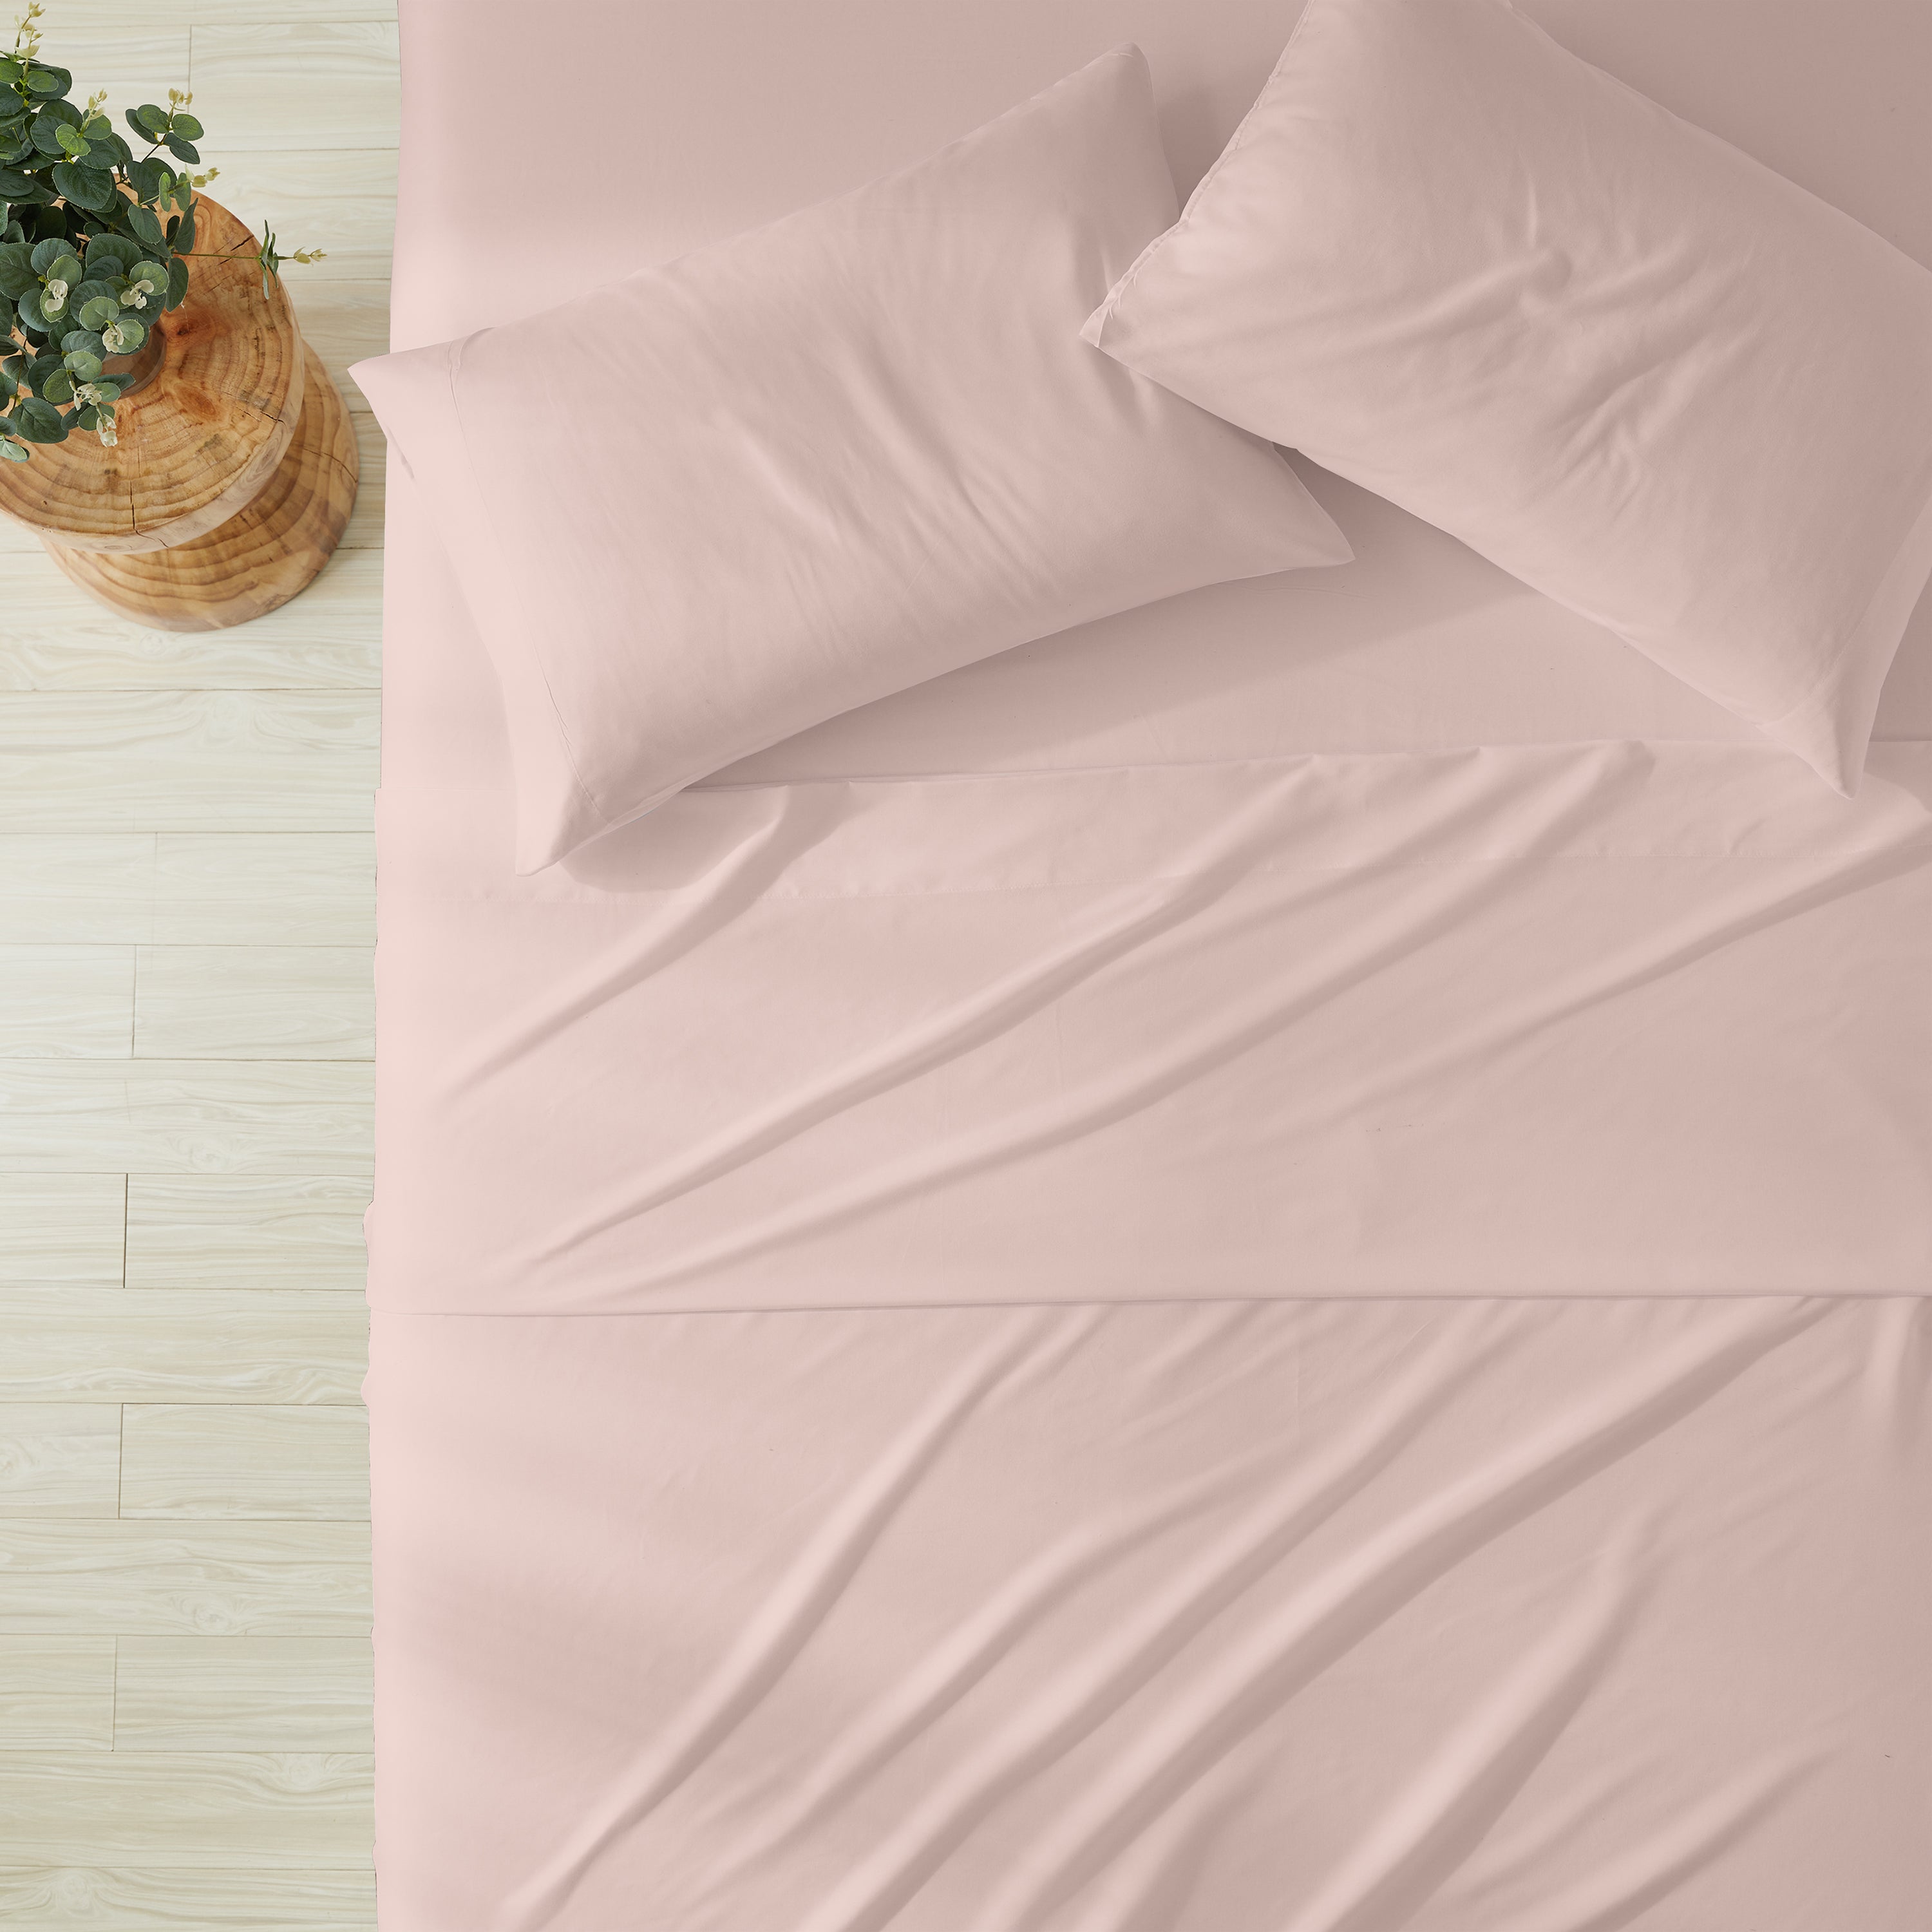 Anti-Microbial 3-4 PC Solid Sheet Set